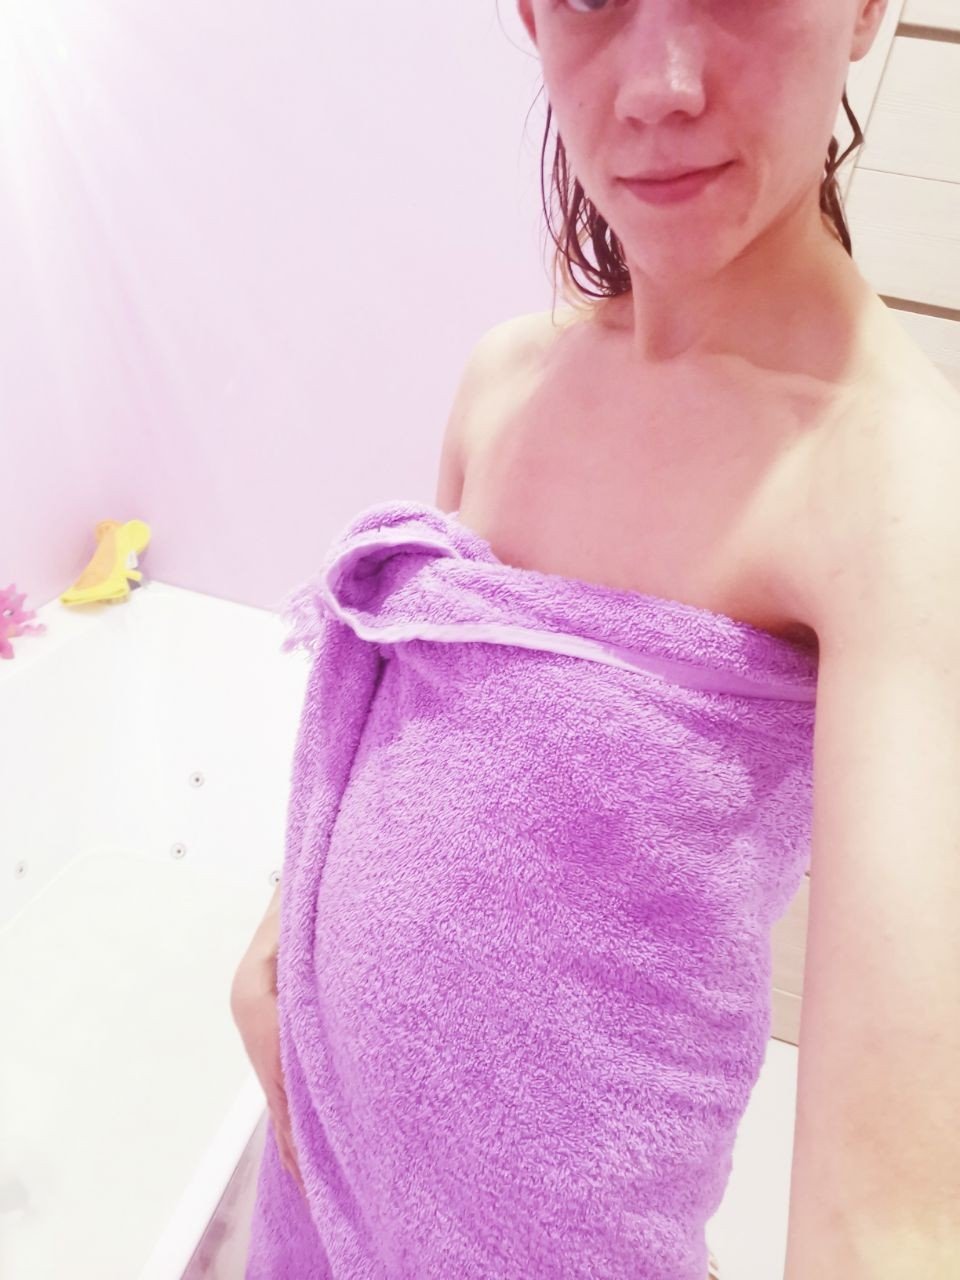 Photo by orgasm with the username @orgasm, who is a star user,  April 3, 2020 at 4:11 PM. The post is about the topic Amateur CamGirls and the text says 'Guess who is going to be live tonight, get your tokens ready 😉, Join Me! Kate Coconut 🥥 👸 💋https://m.chaturbate.com/coconut_girl1991/ #livetonight #chaturbate #camgirl #cammodel #petite'